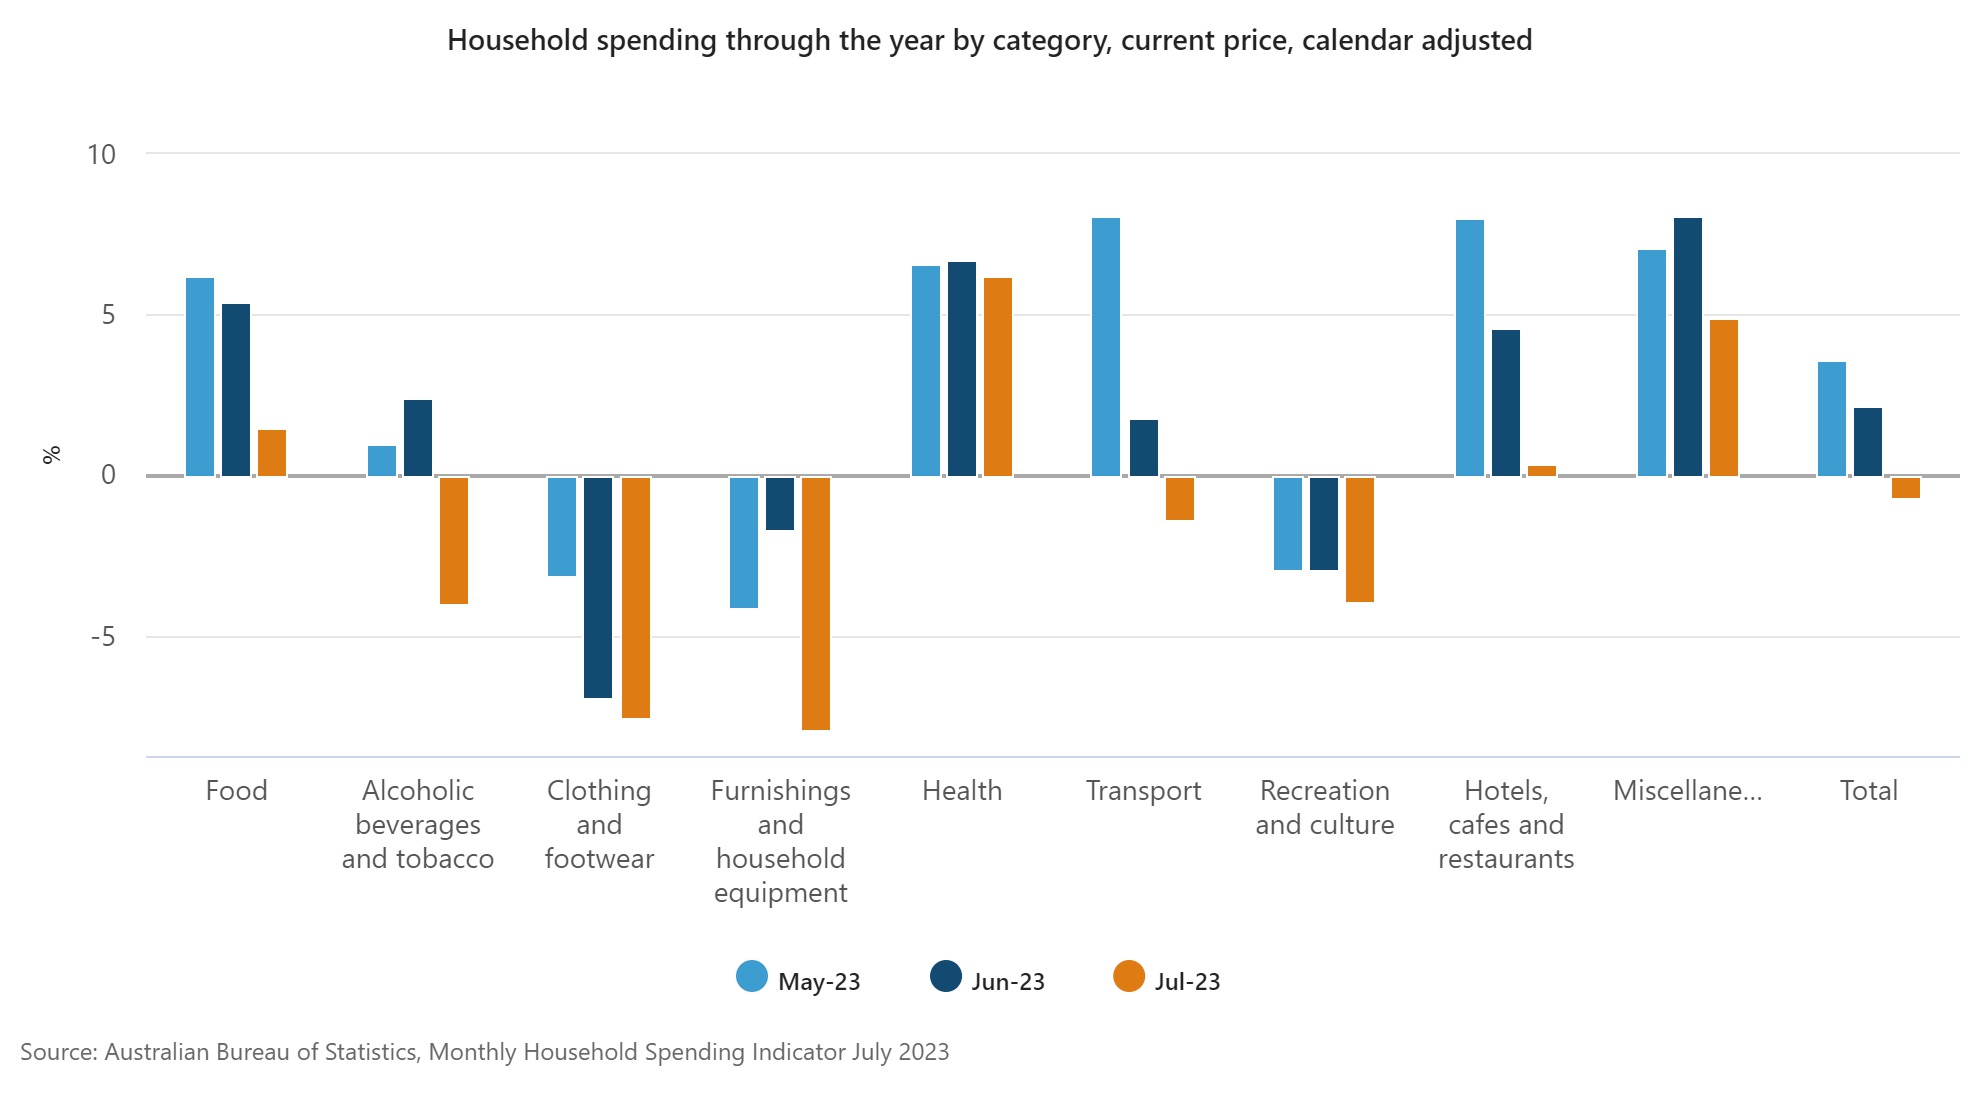 Household spending through the year by category. Source: ABS